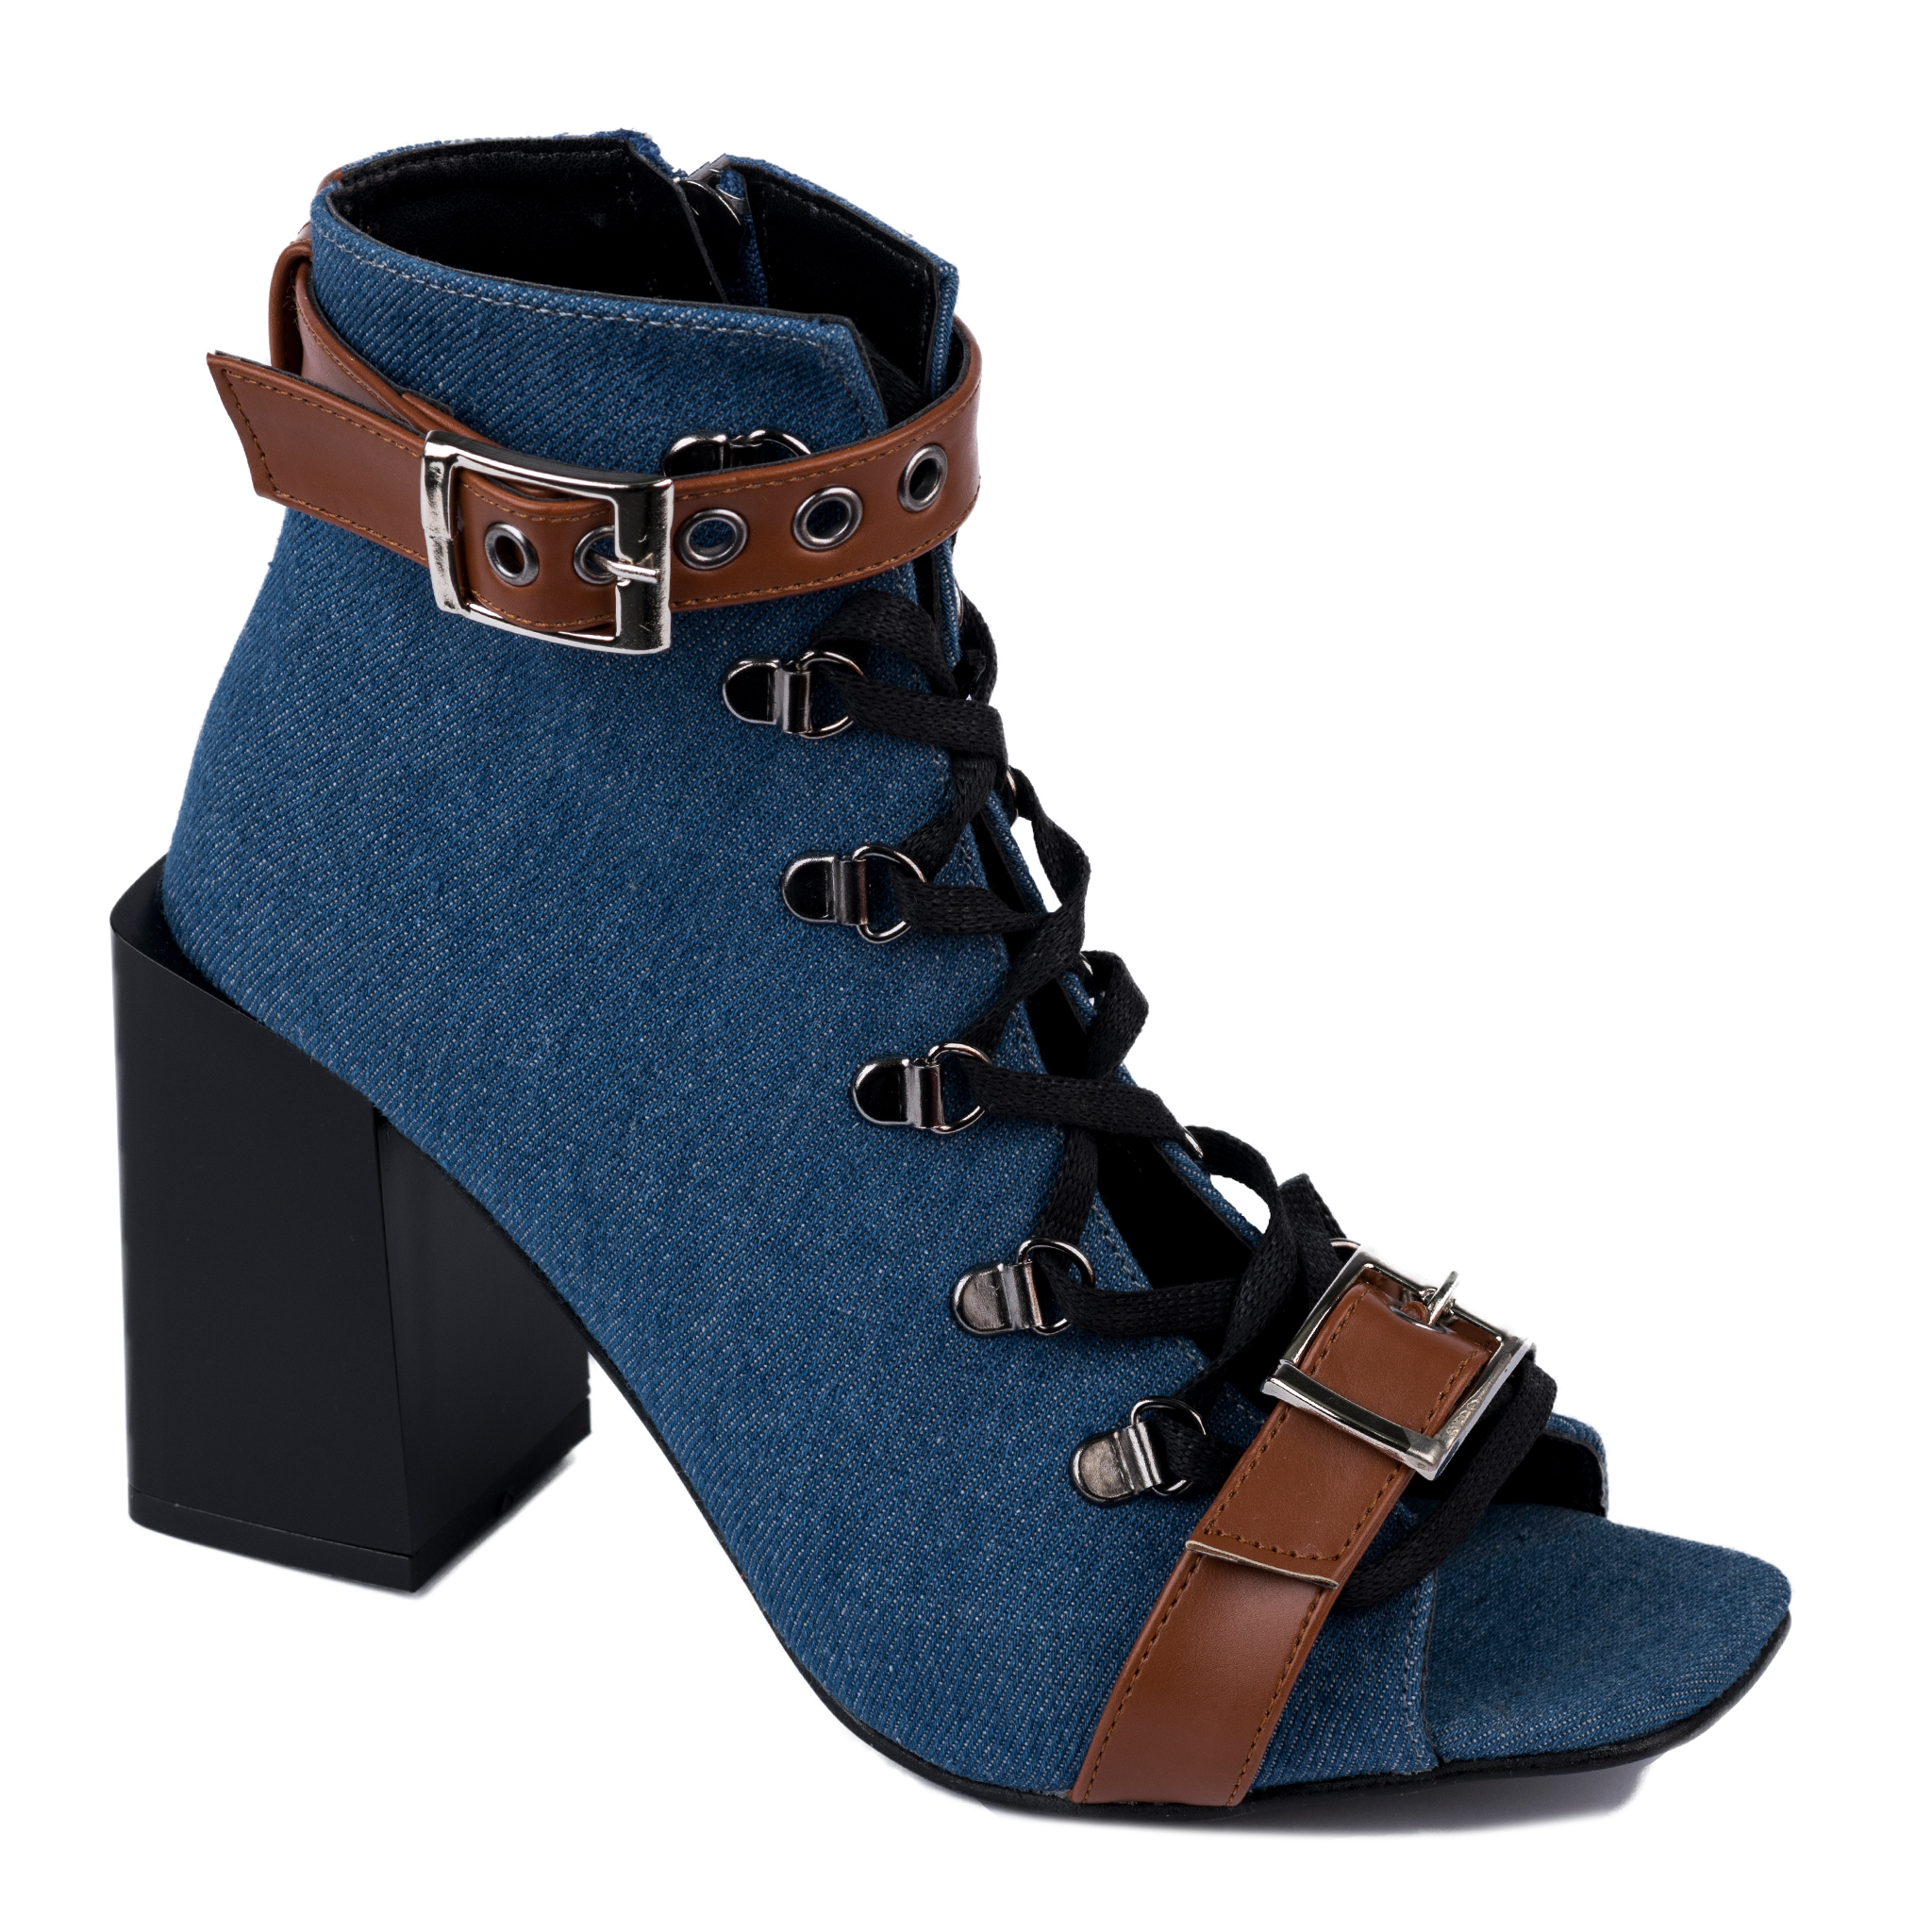 PEEP TOE ANKLE BOOTS WITH BELTS AND BLOCK HEEL - BLUE